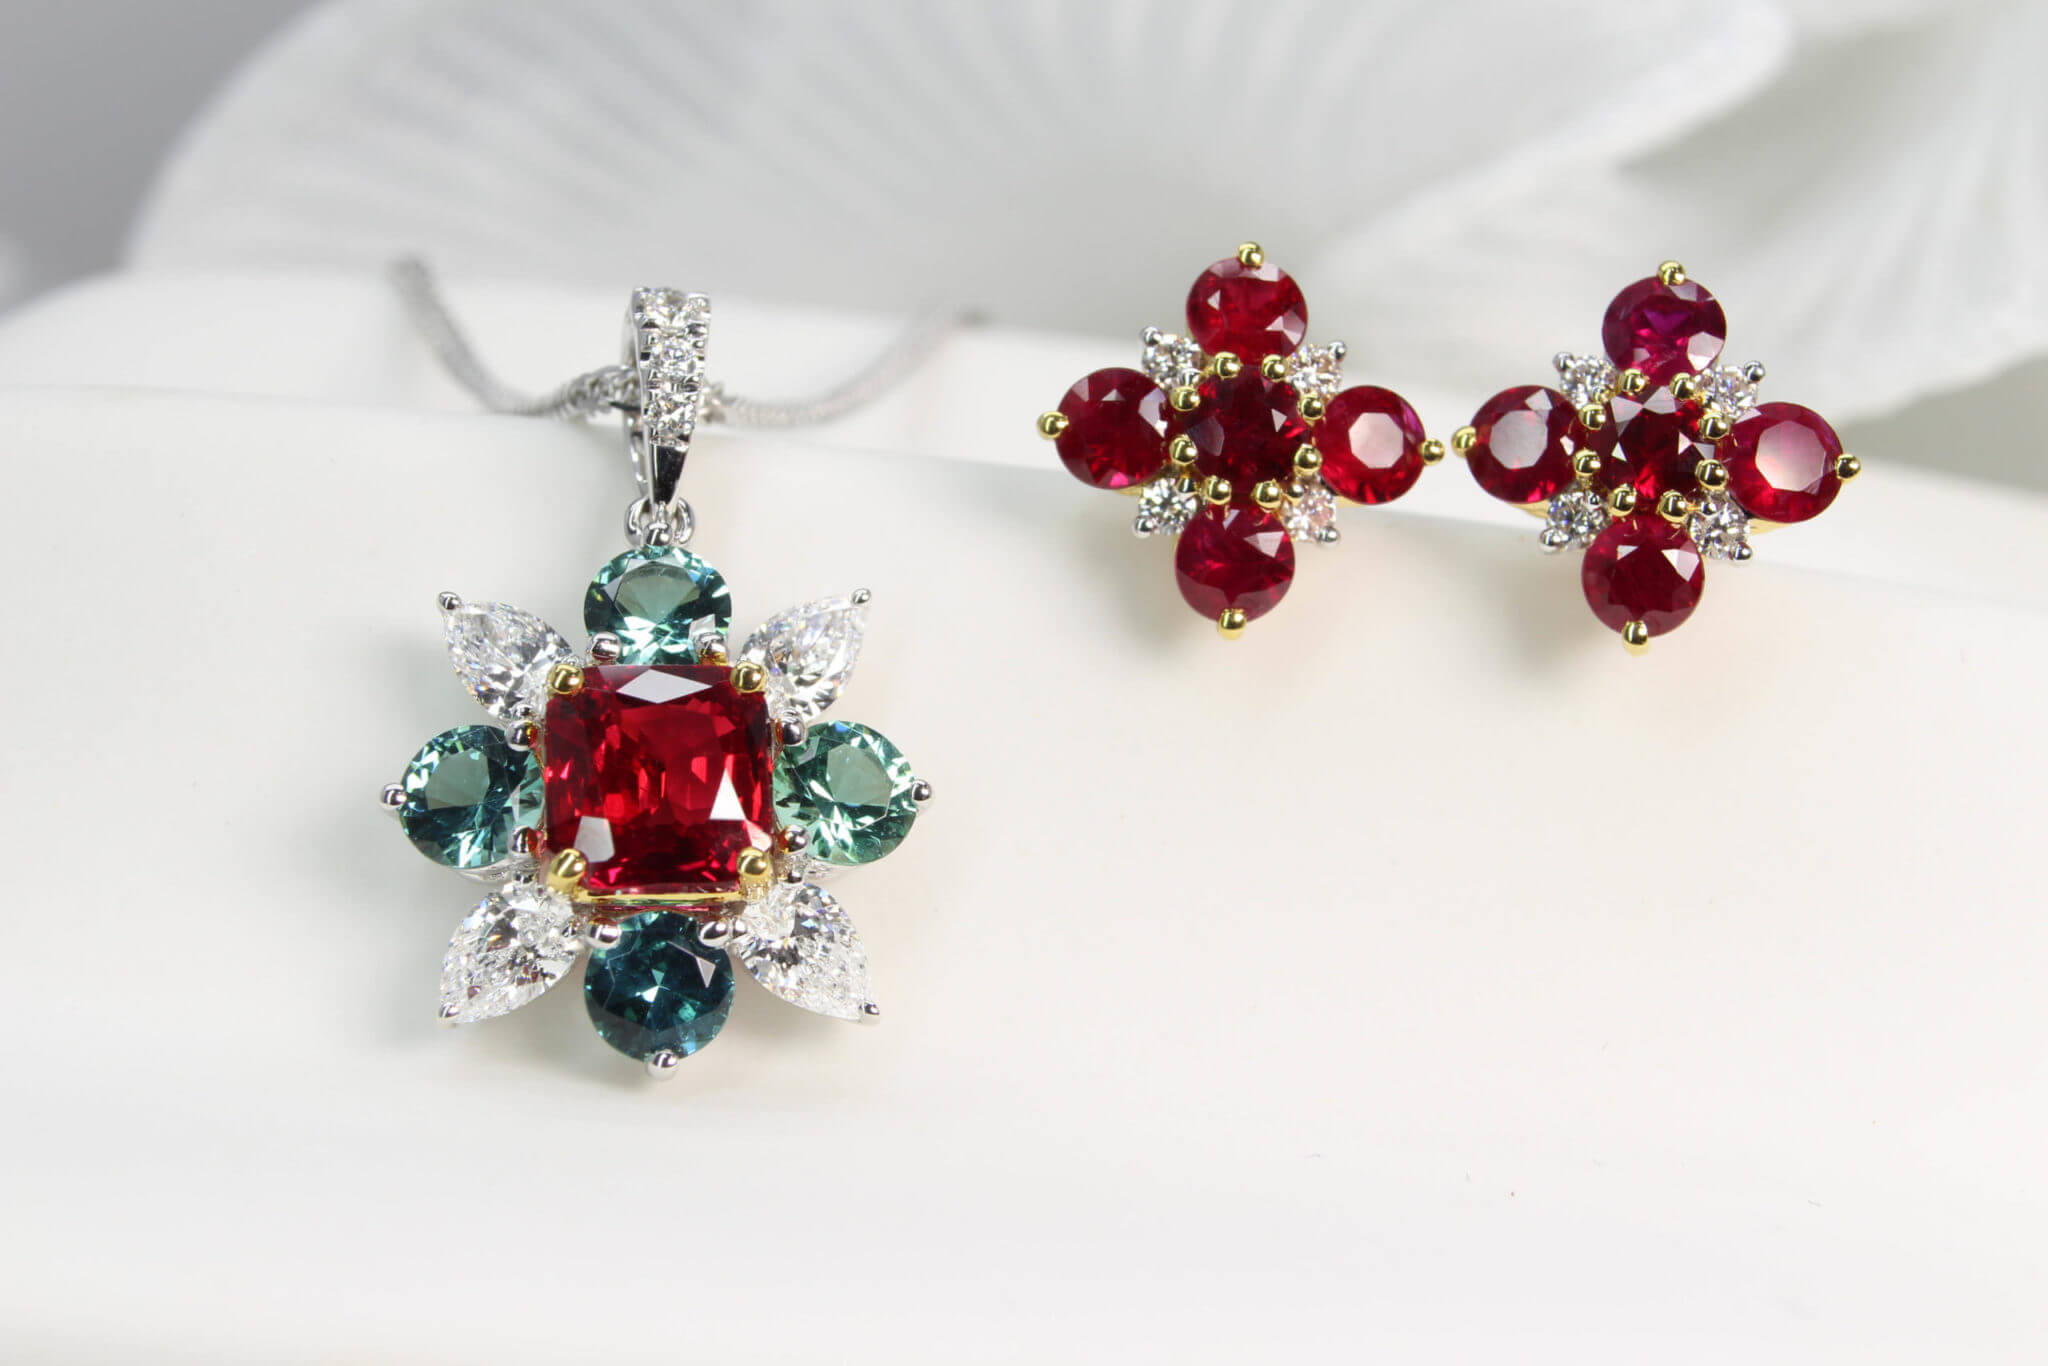 40th Anniversary Wedding Jewellery, Featuring unheated ruby depend clustered with round green tourmaline and pear diamond around the ruby gem. The cluster earring with ruby and diamond gems design and customised for a 40th anniversary wedding jewellery | Local Singapore Jeweller in ruby and coloured gemstone